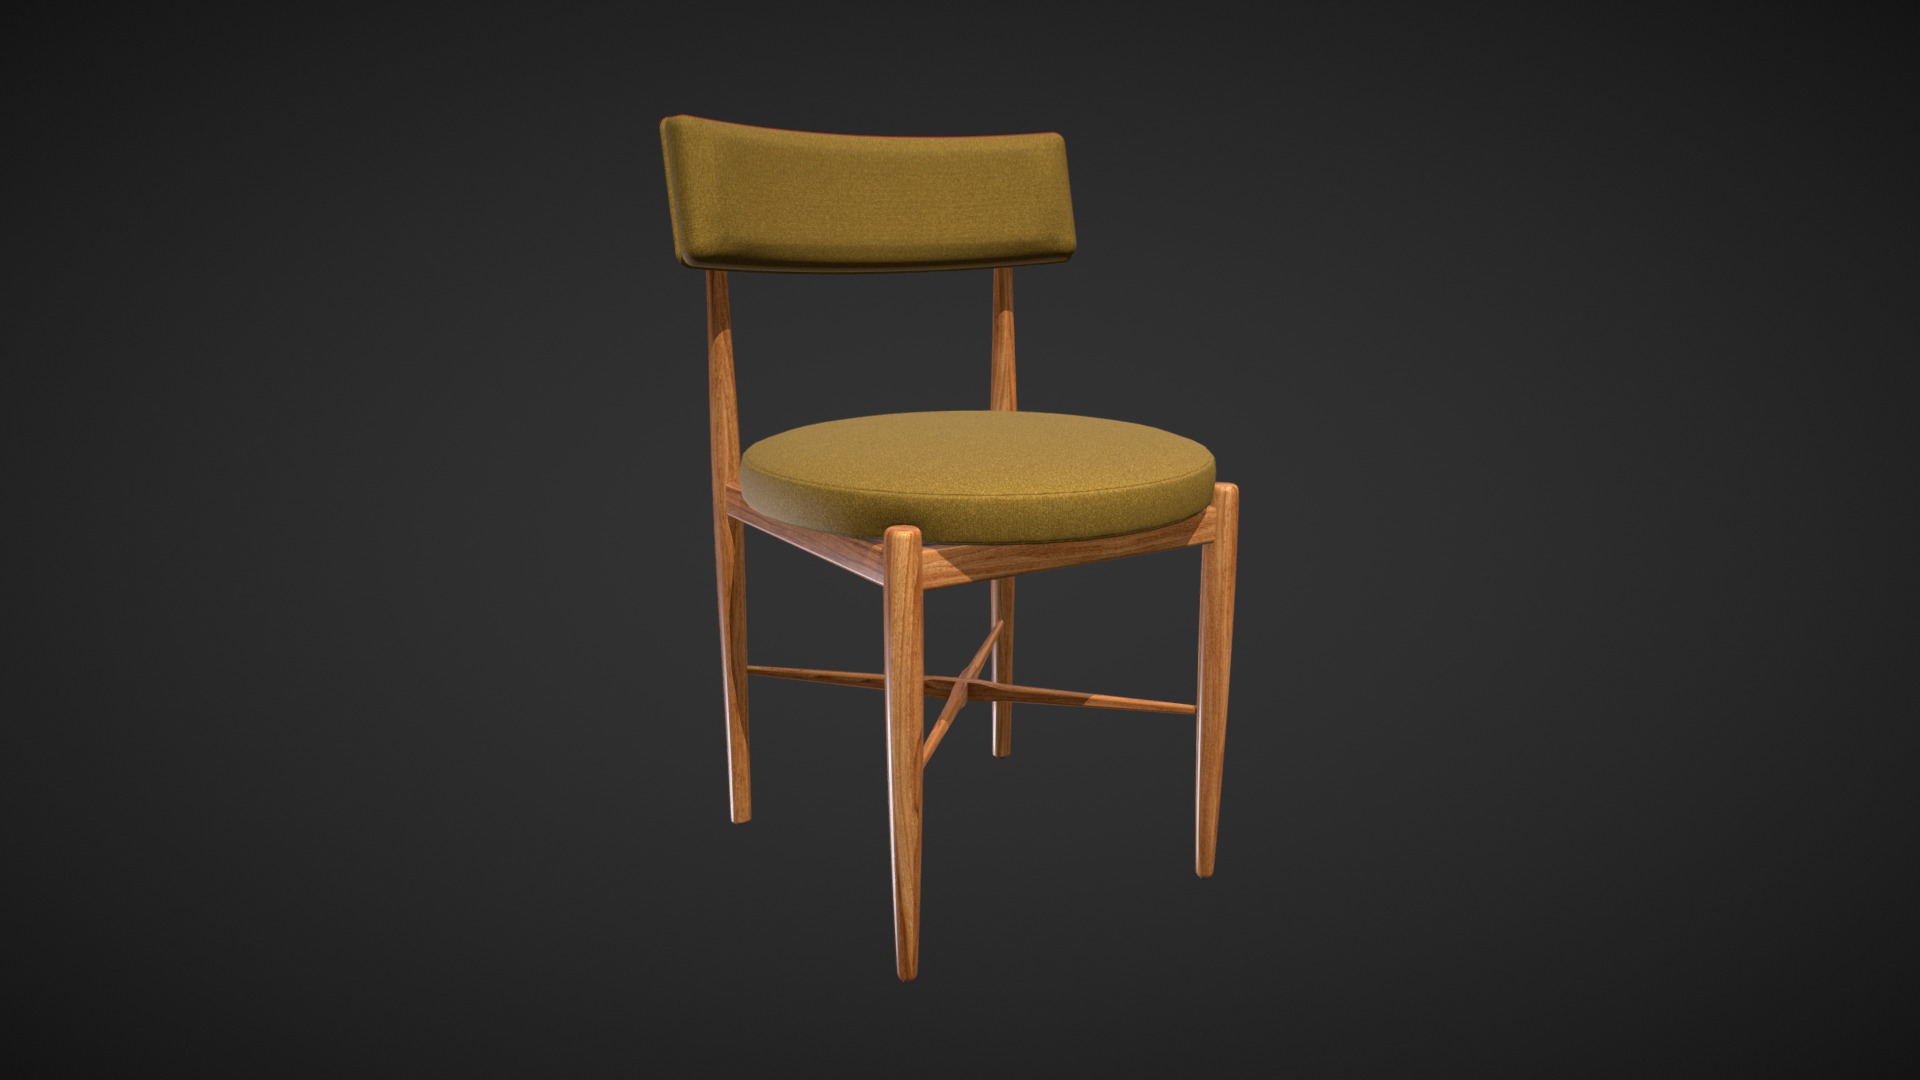 3D model Antique chair Henry-1 - This is a 3D model of the Antique chair Henry-1. The 3D model is about a chair with a cushion.